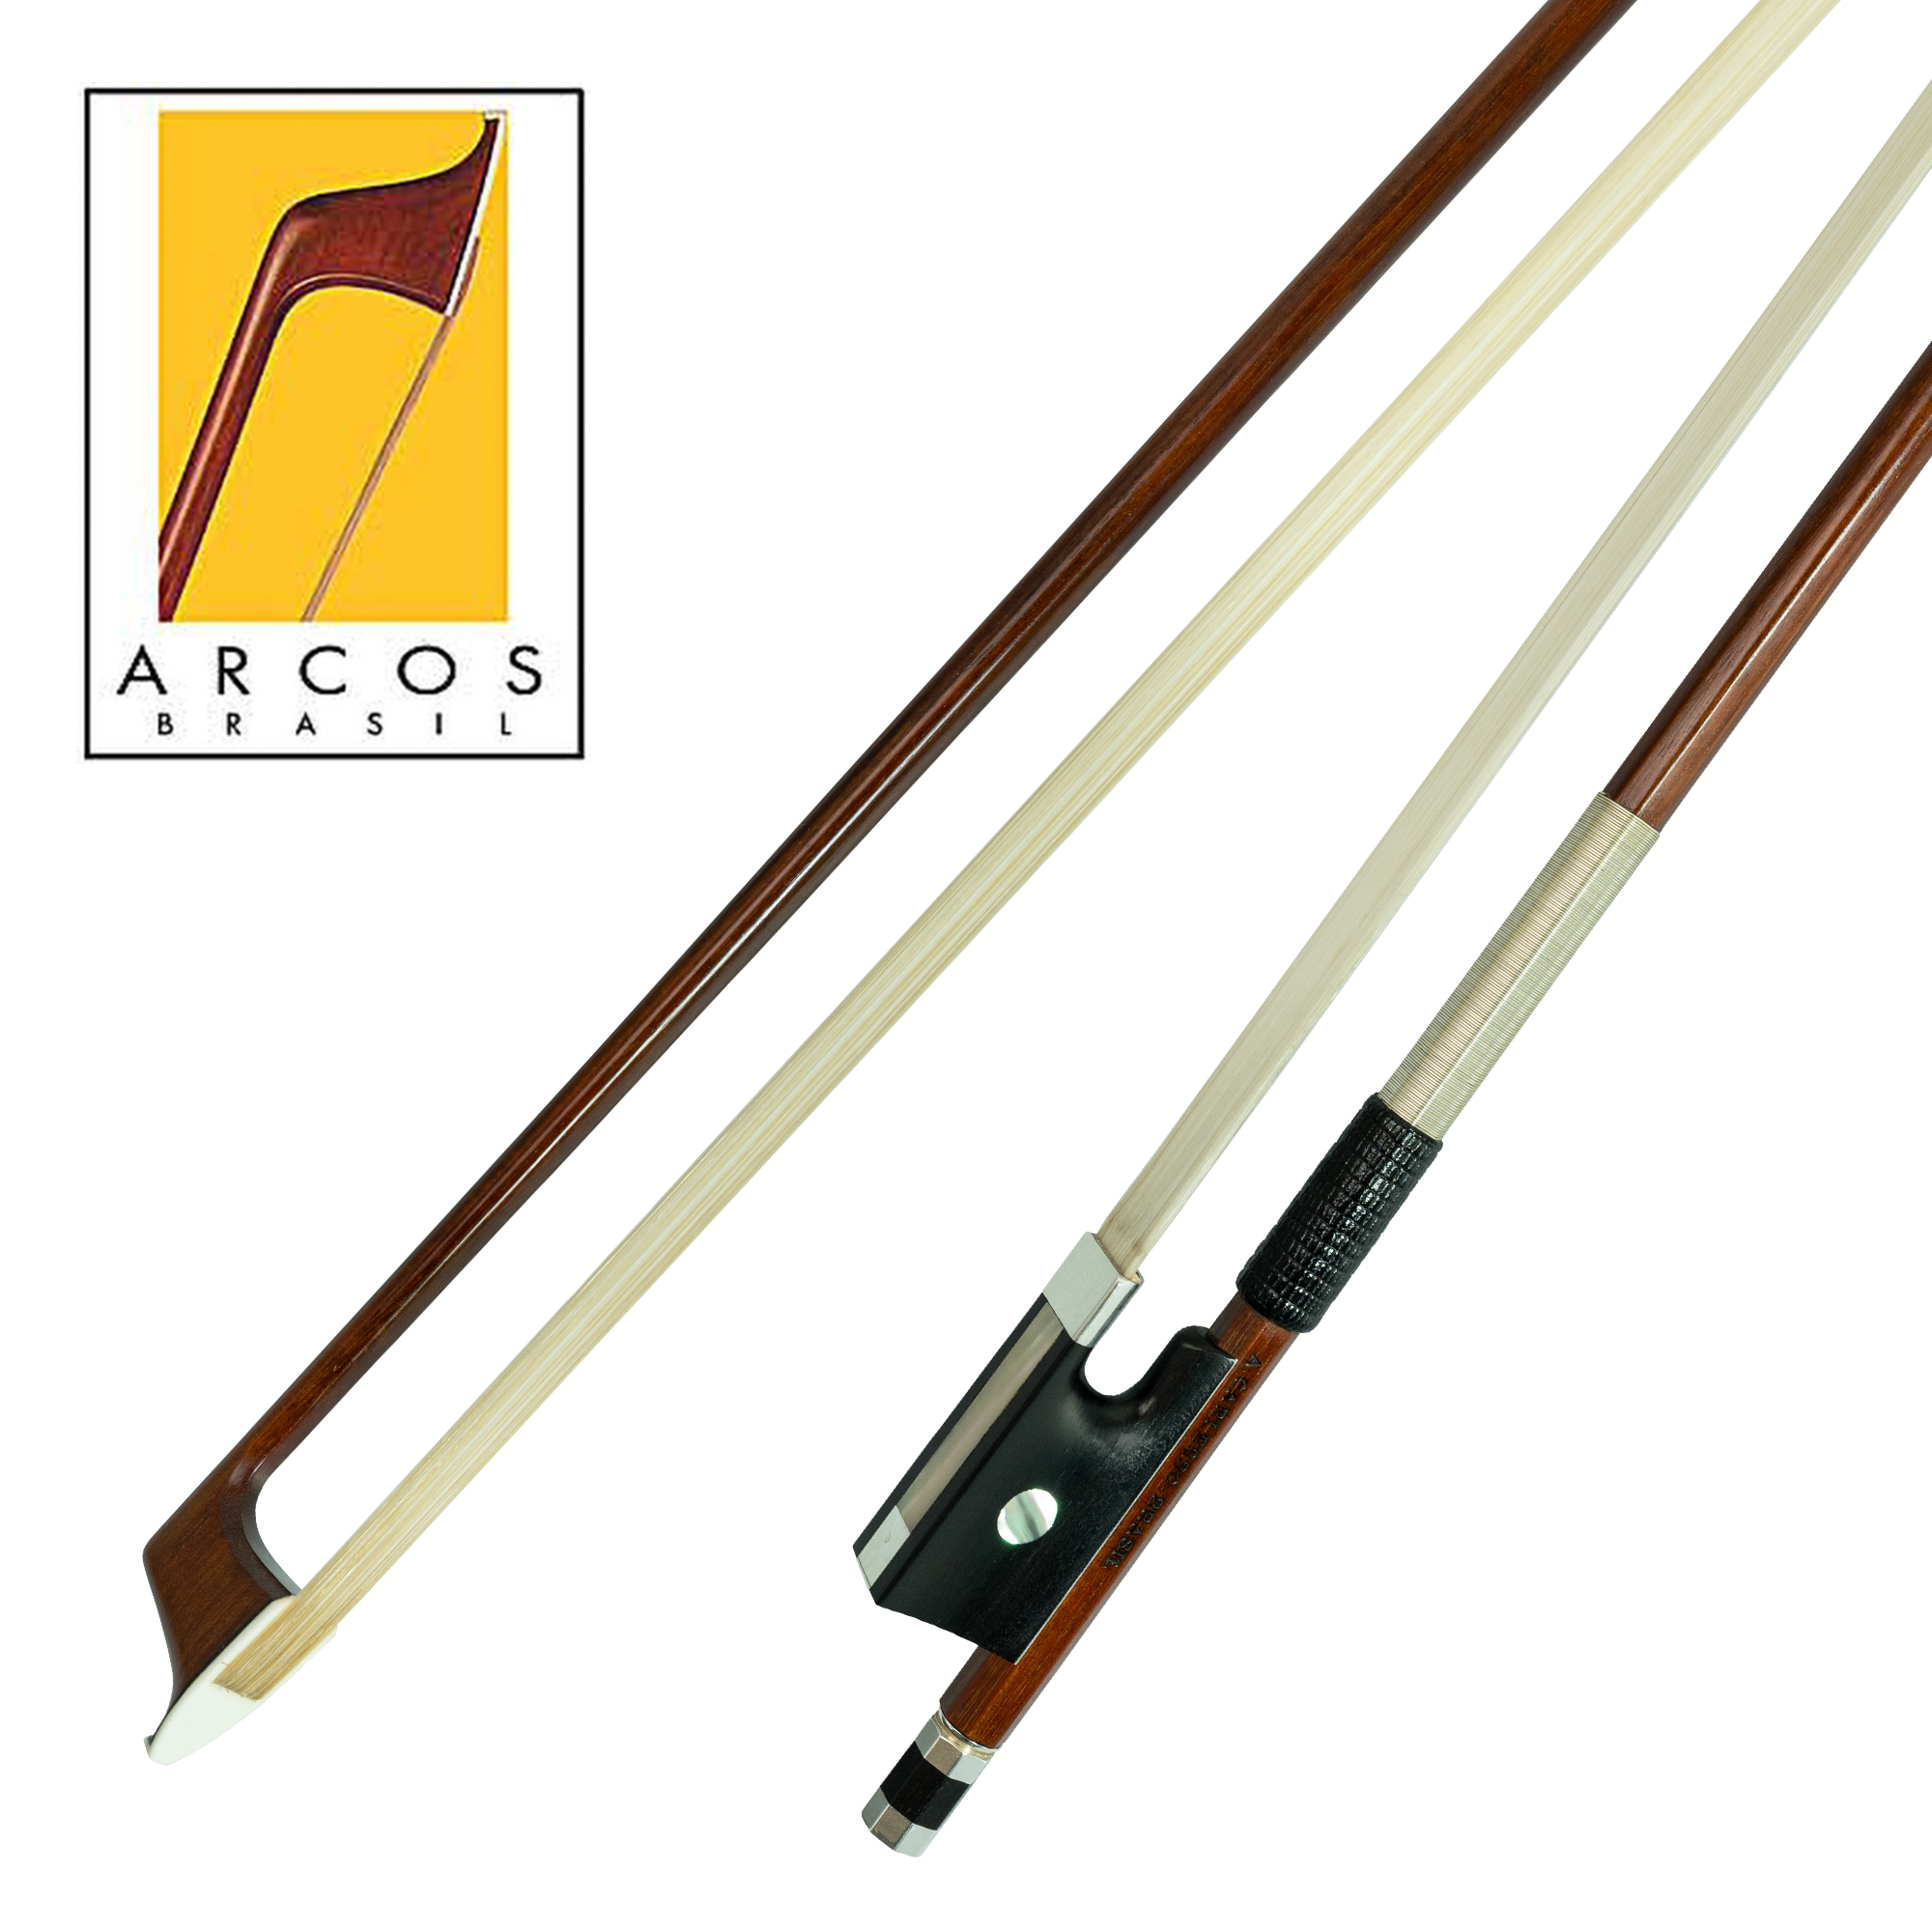 Arcos Brasil Peccatte Copy Silver Mounted Violin Bow in action